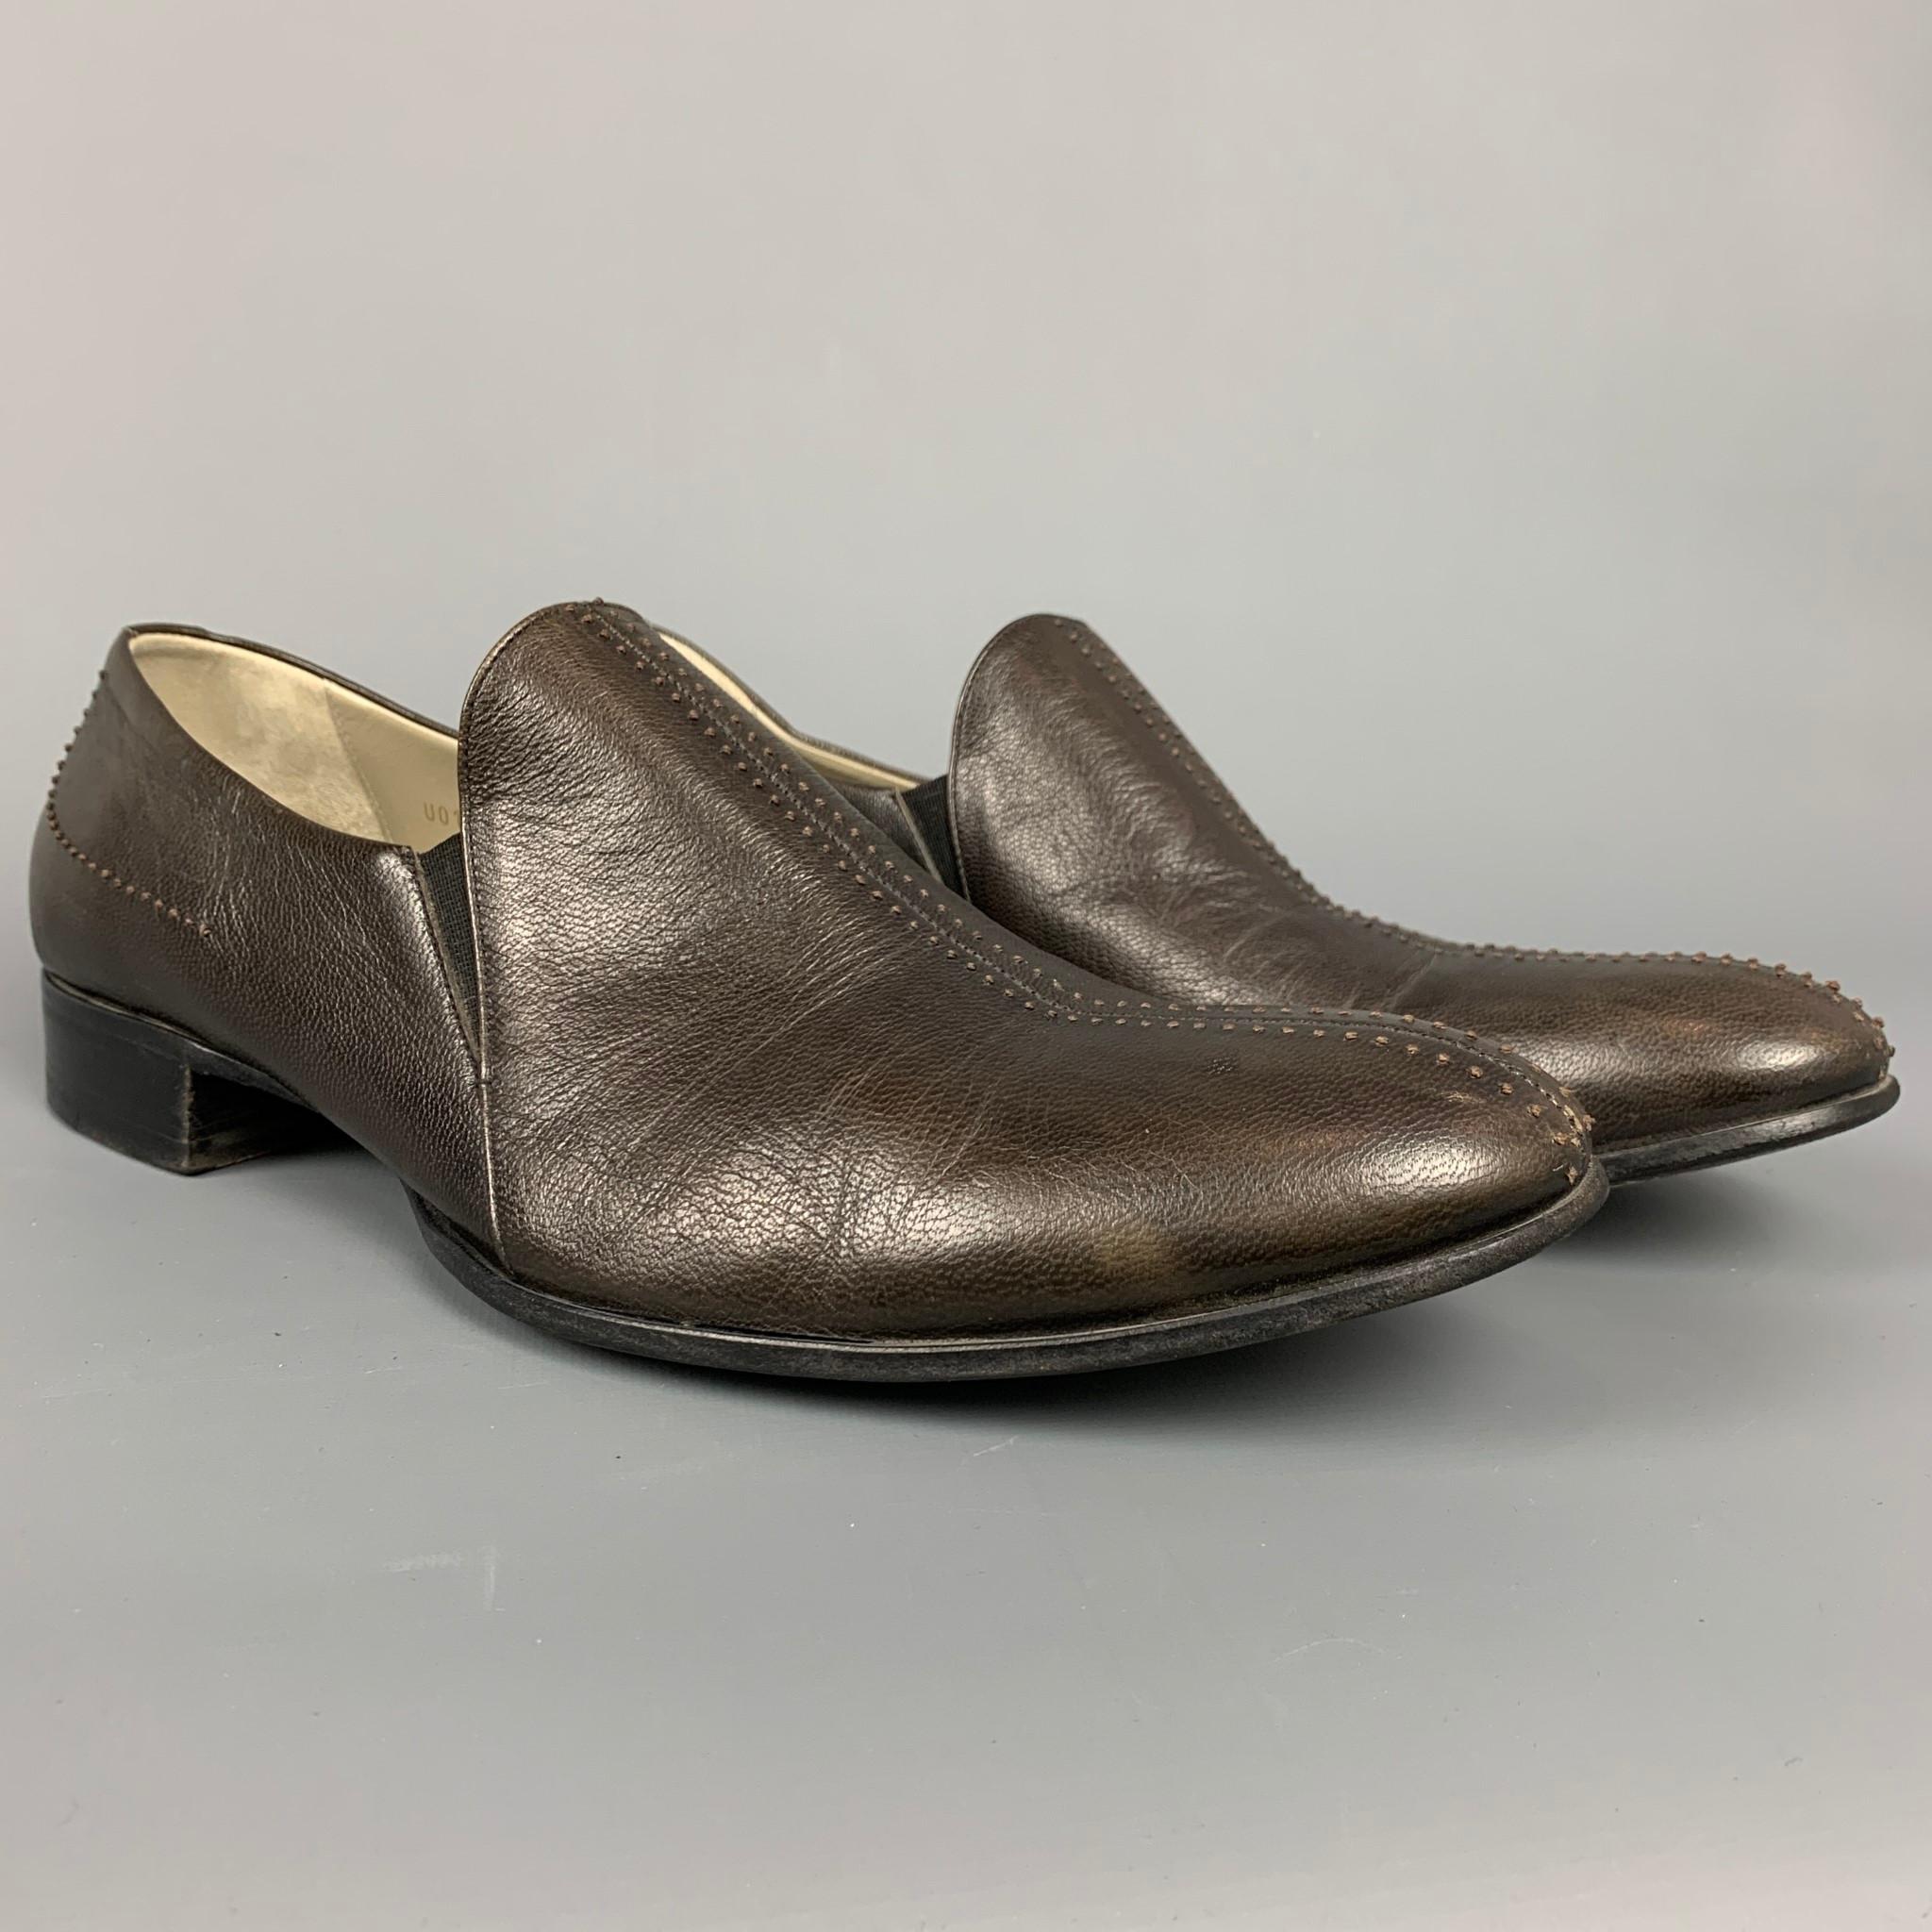 BRUNO MAGLI loafers comes in a brown leather with contrast stitching featuring a slip on style and a wooden sole. Made in Italy.

Very Good Pre-Owned Condition.
Marked: 9 F

Outsole: 4 in. x 12.5 in. 